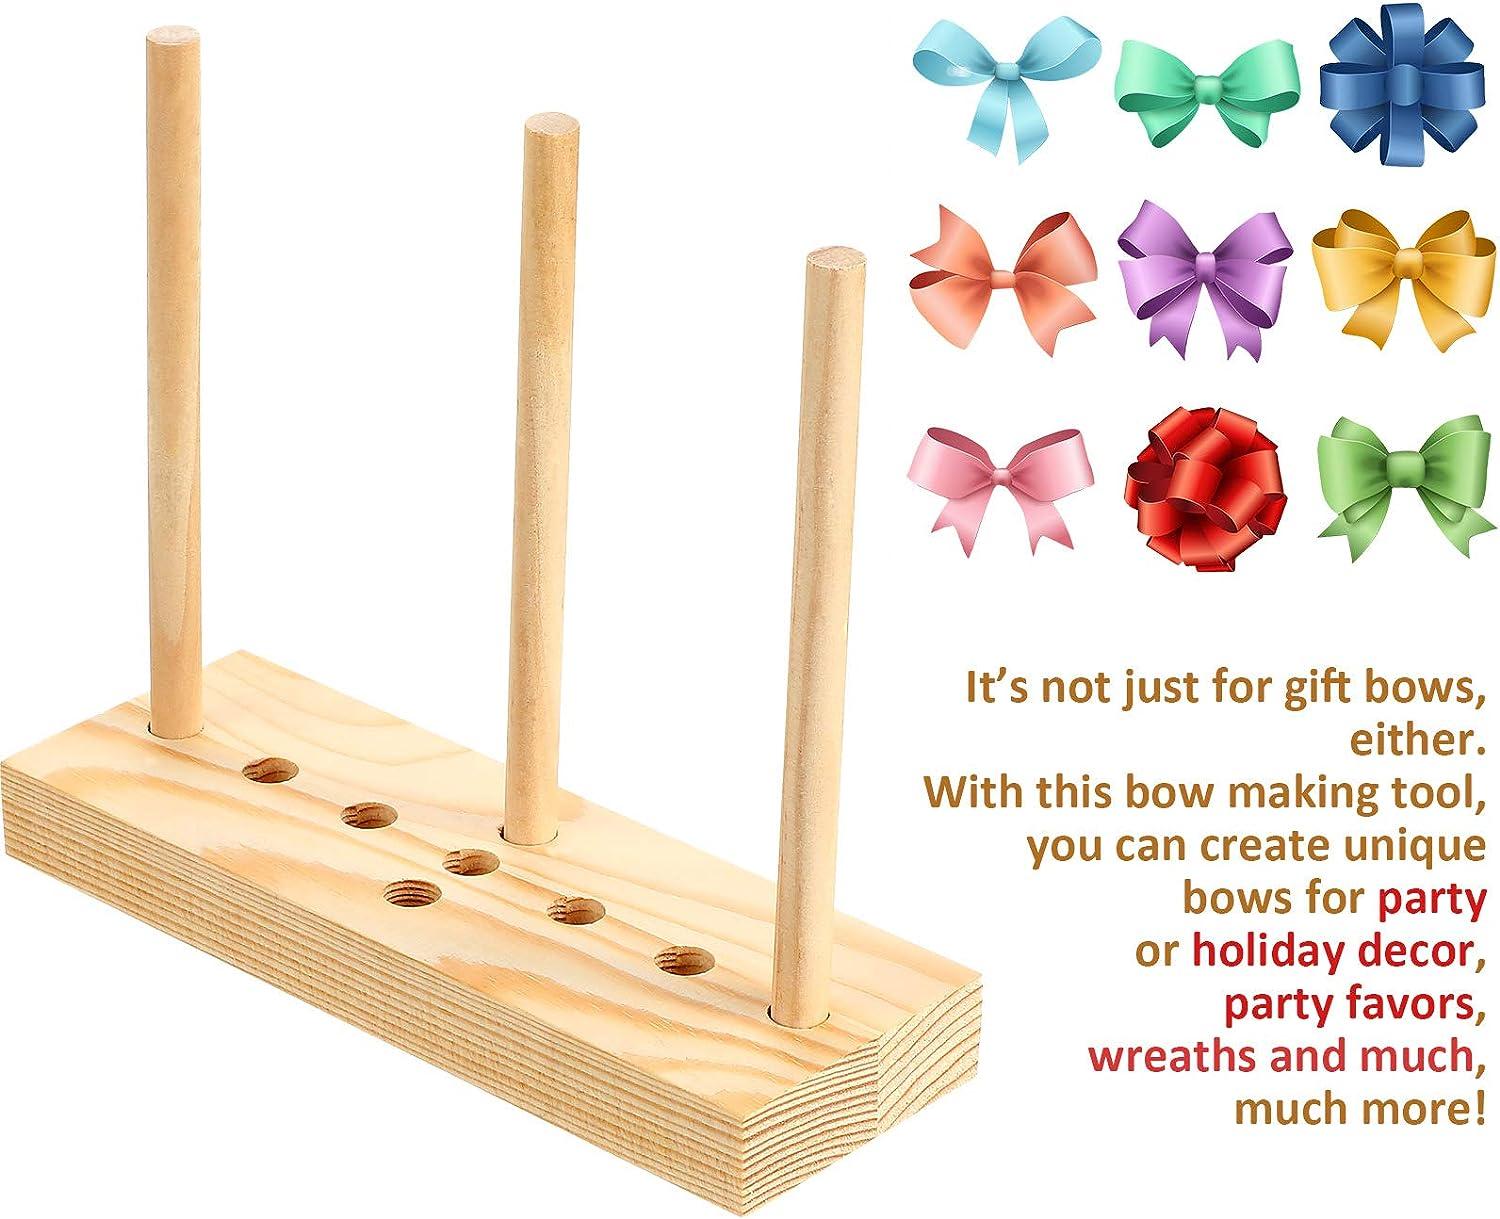 Bow Making Tool for Ribbon and Wreaths, Wooden Wreath Bow Maker for Making  Gift Bows Wrist Corsages Christmas Bows Party Decorations Hair Bows Holiday  Wreaths